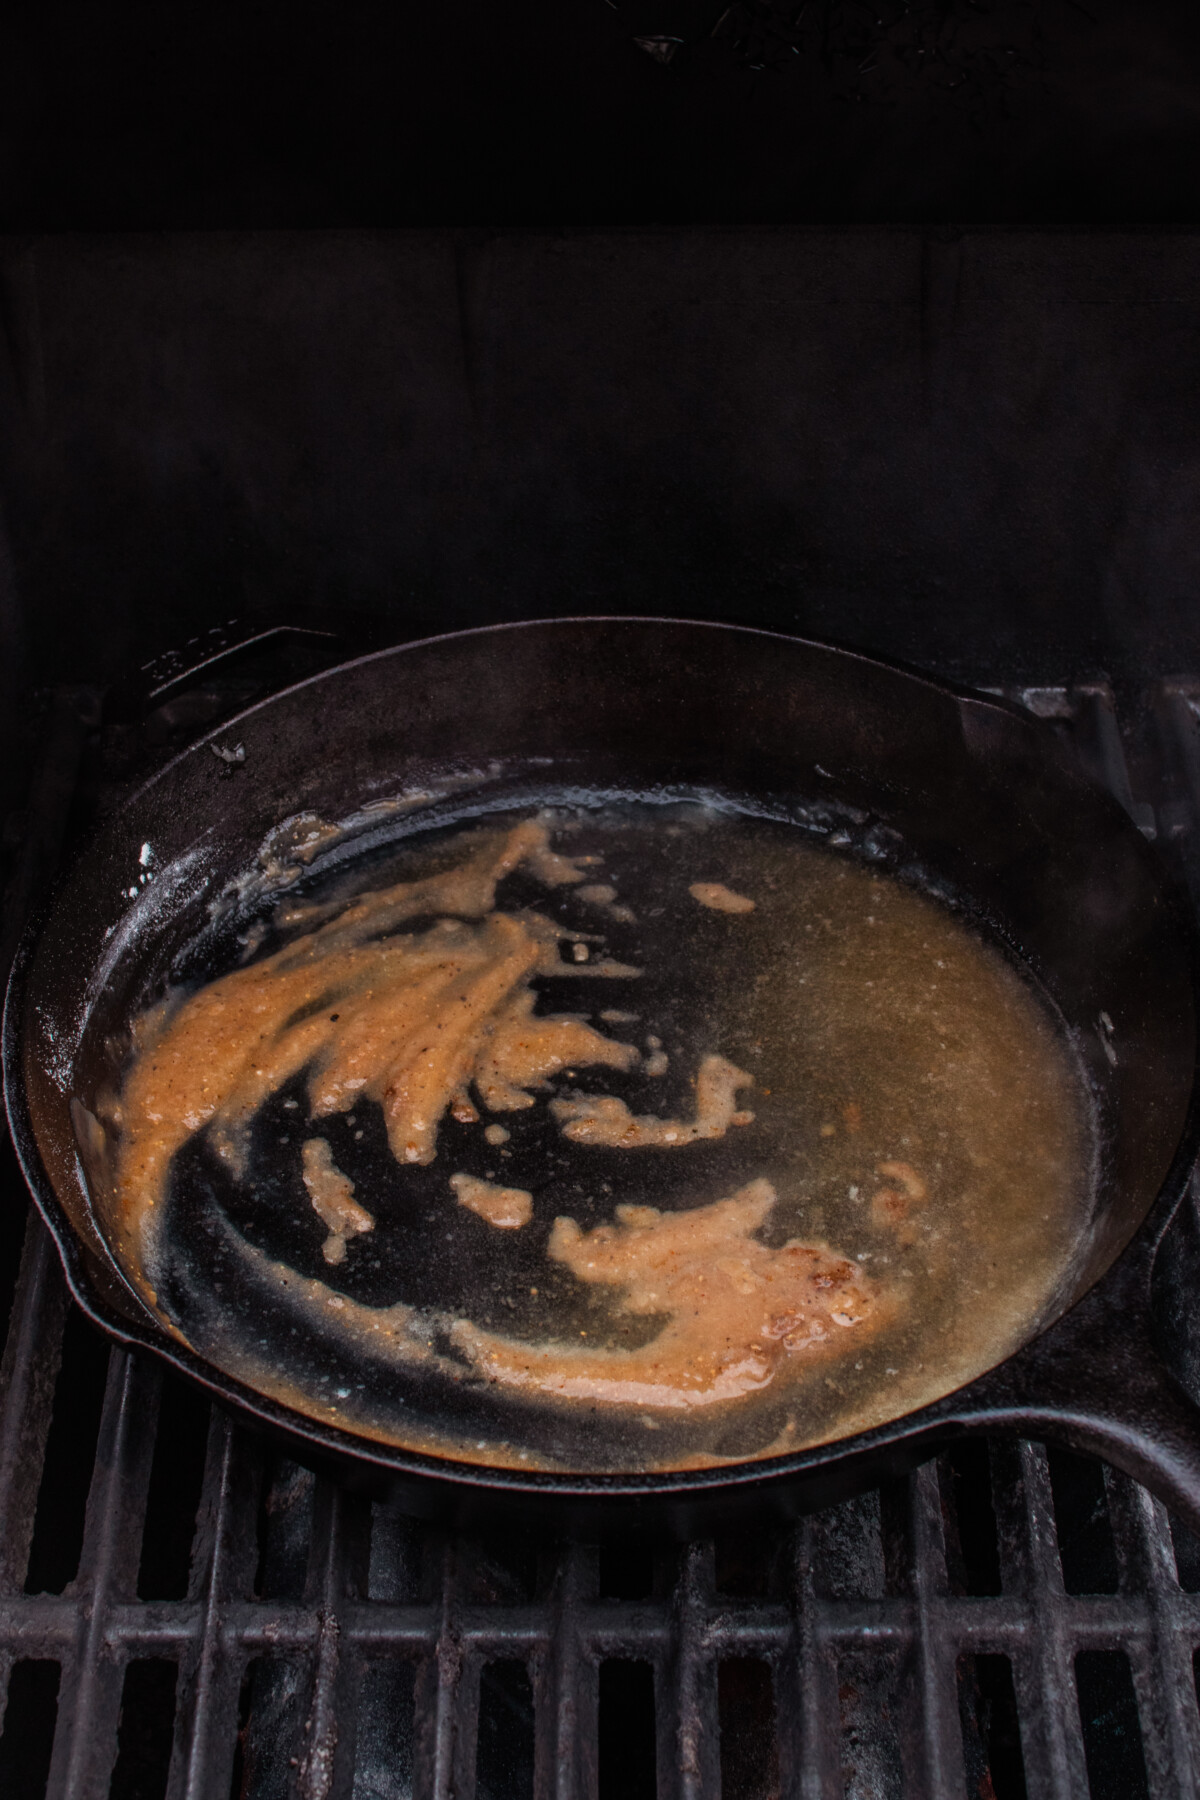 Roux forming in cast iron skillet.